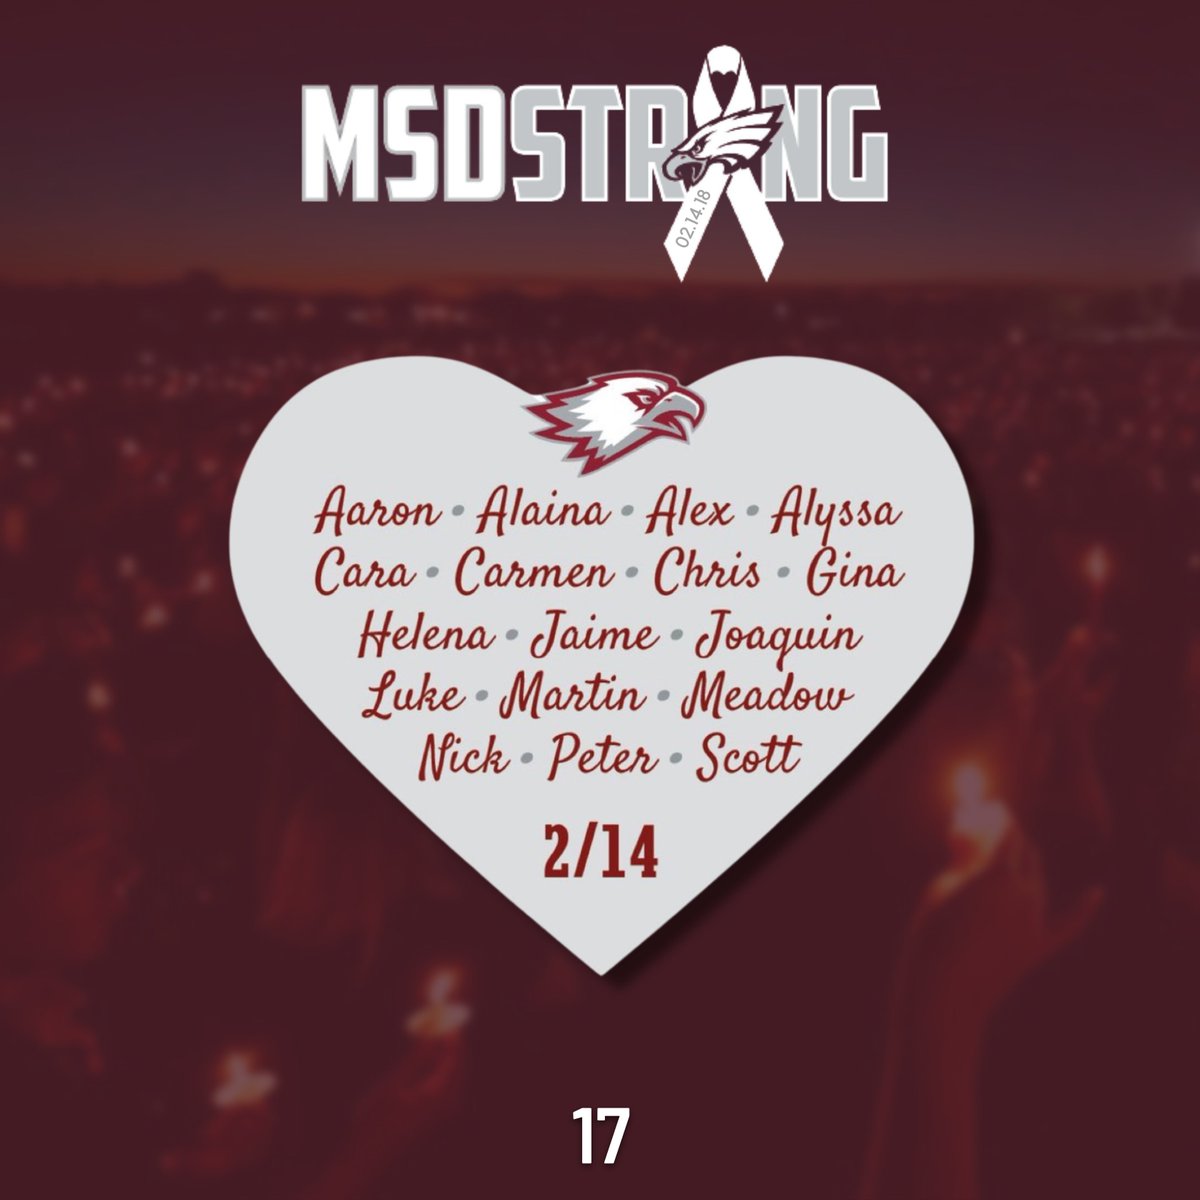 Today marks 5 years since the tragedy at Marjory Stoneman Douglas. My heart today is with Parkland, Broward, and all of our students and community as we continue this lifelong journey of healing. Today, and always, we remember and commemorate 🤍❤️

02.14.18 #msdstrong